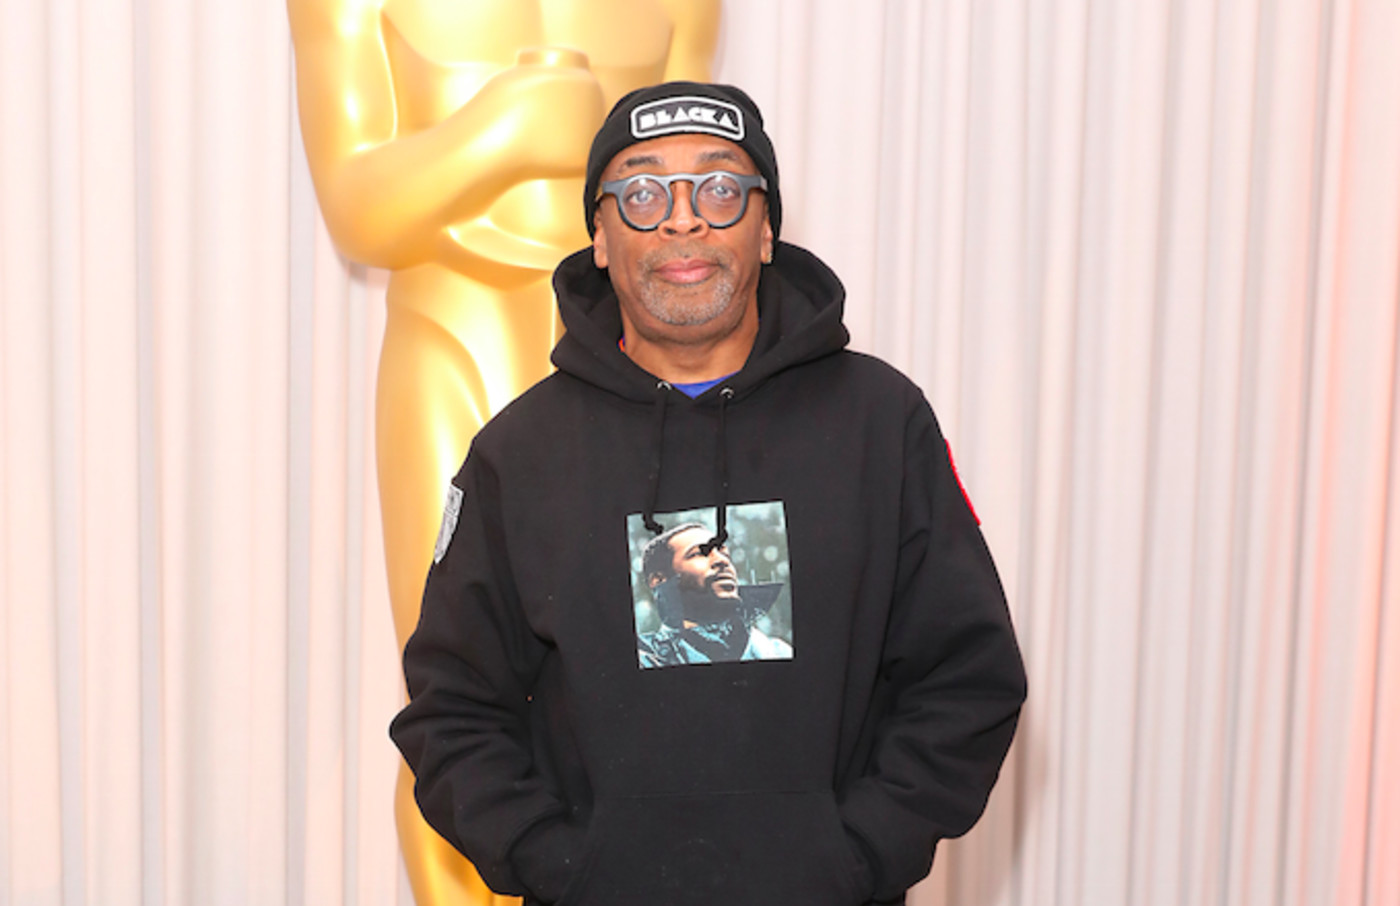 Spike Lee Boycotts Gucci Prada, Says 'They Don't Have a Clue' About Complex